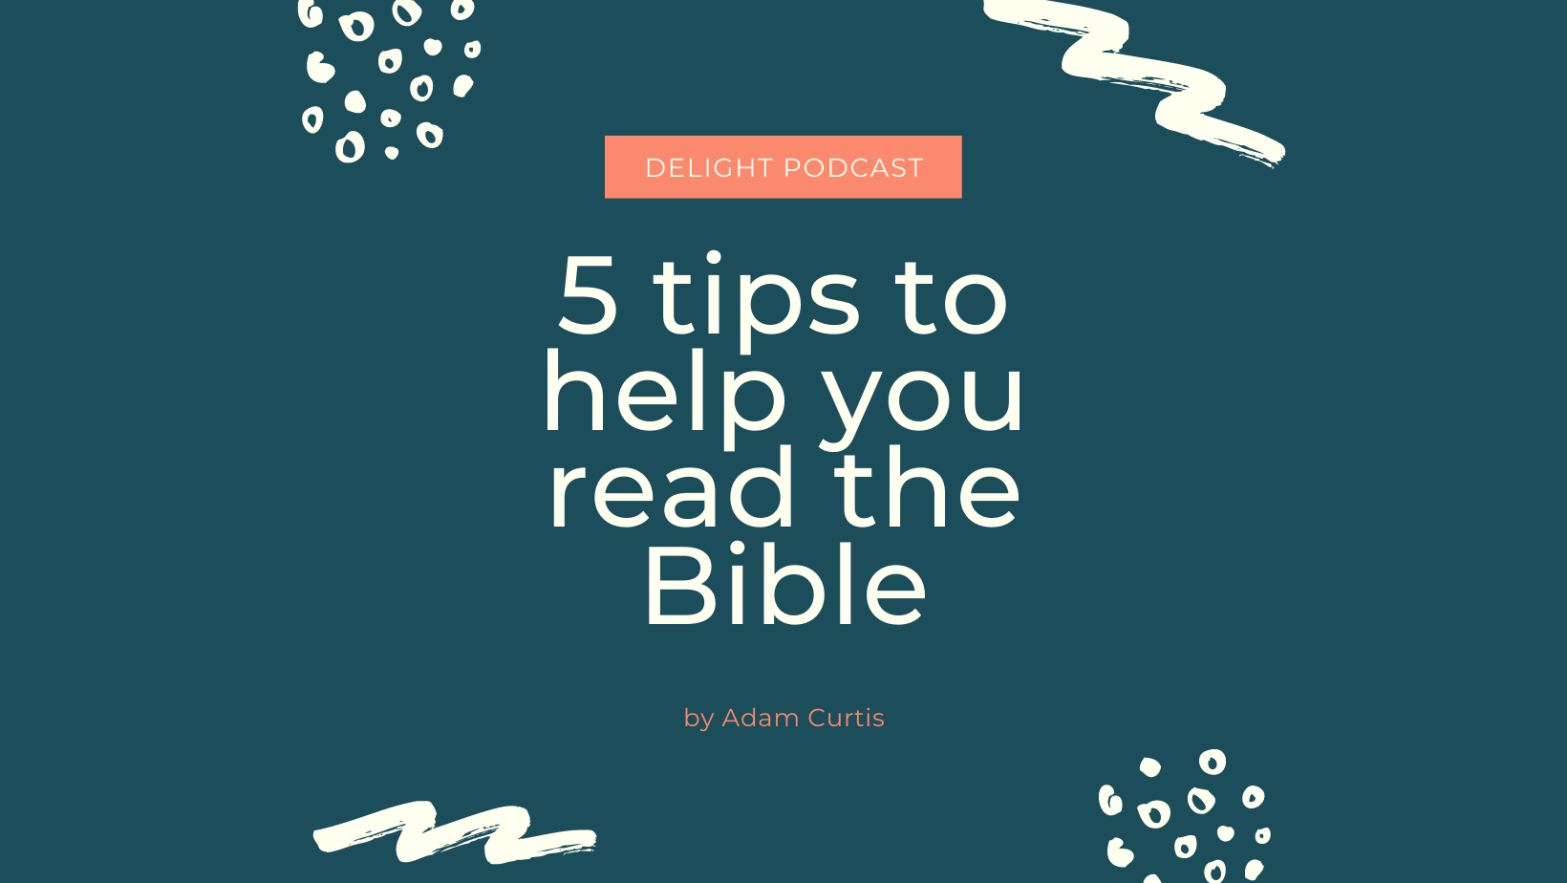 5 tips to help you read the Bible blog by Adam Curtis Delight Podcast for new Christians and encouragement for others with Adam Curtis and Leah sax